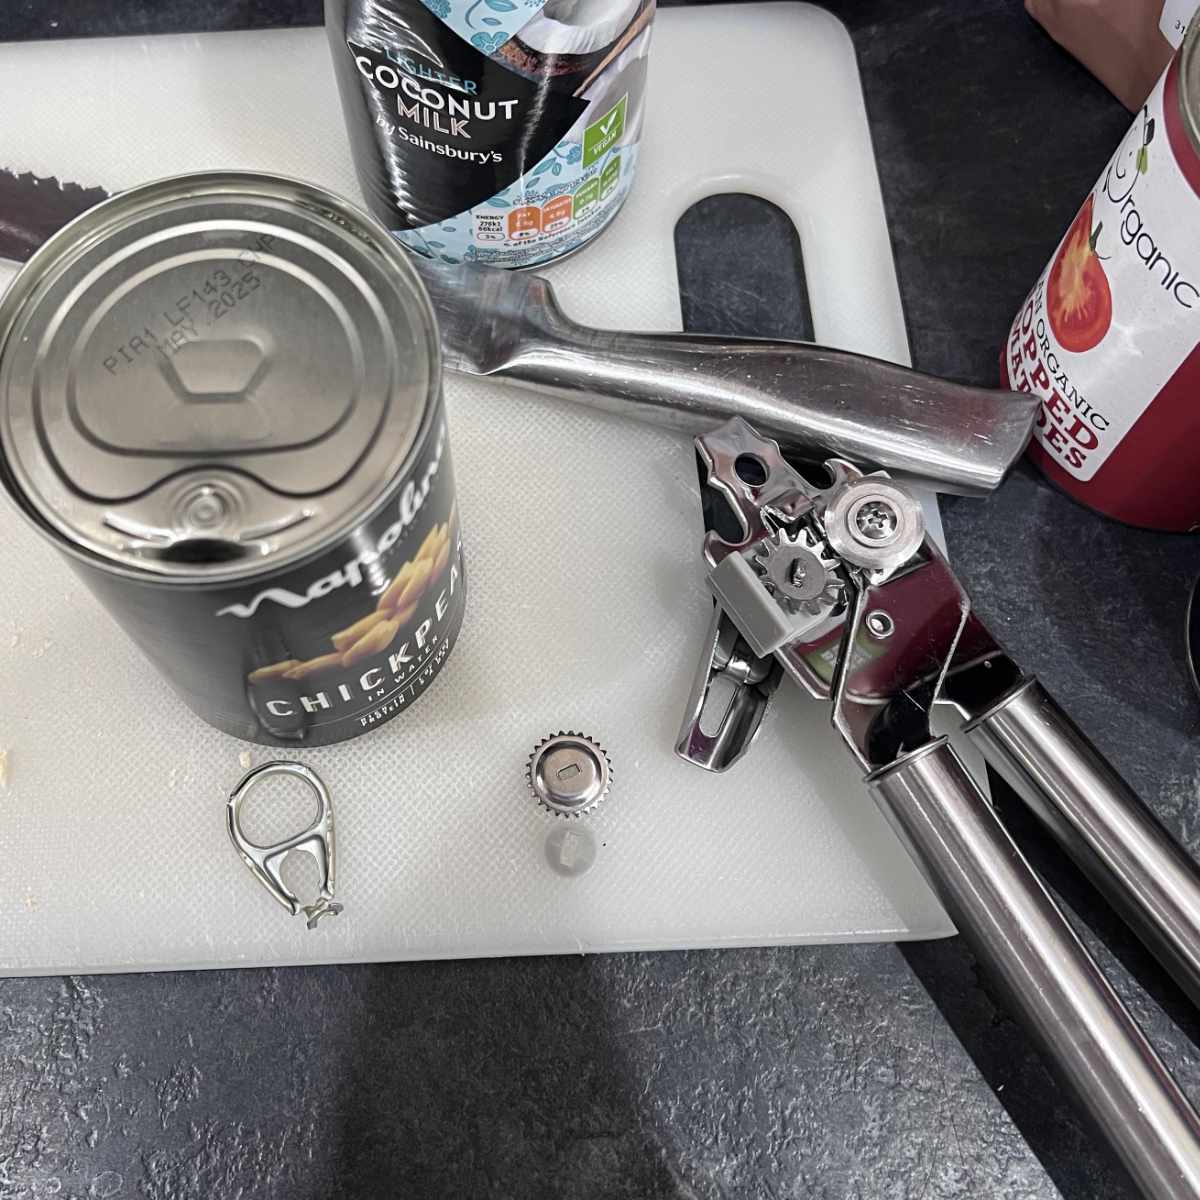 The ring pull failed, then the can opener fell to pieces